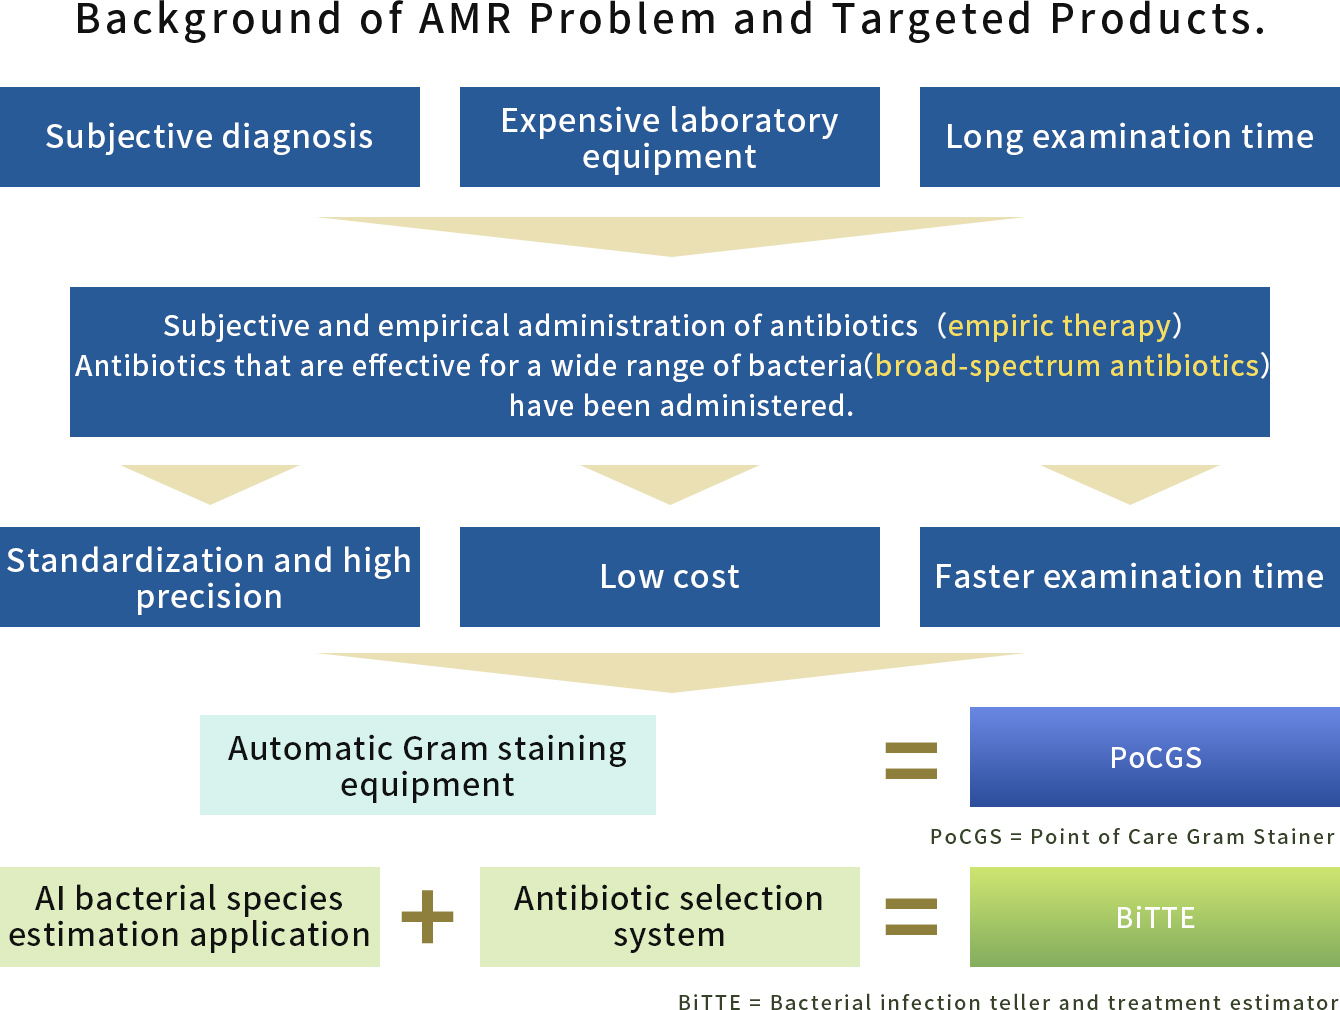 Background of AMR Problem and Targeted Products.